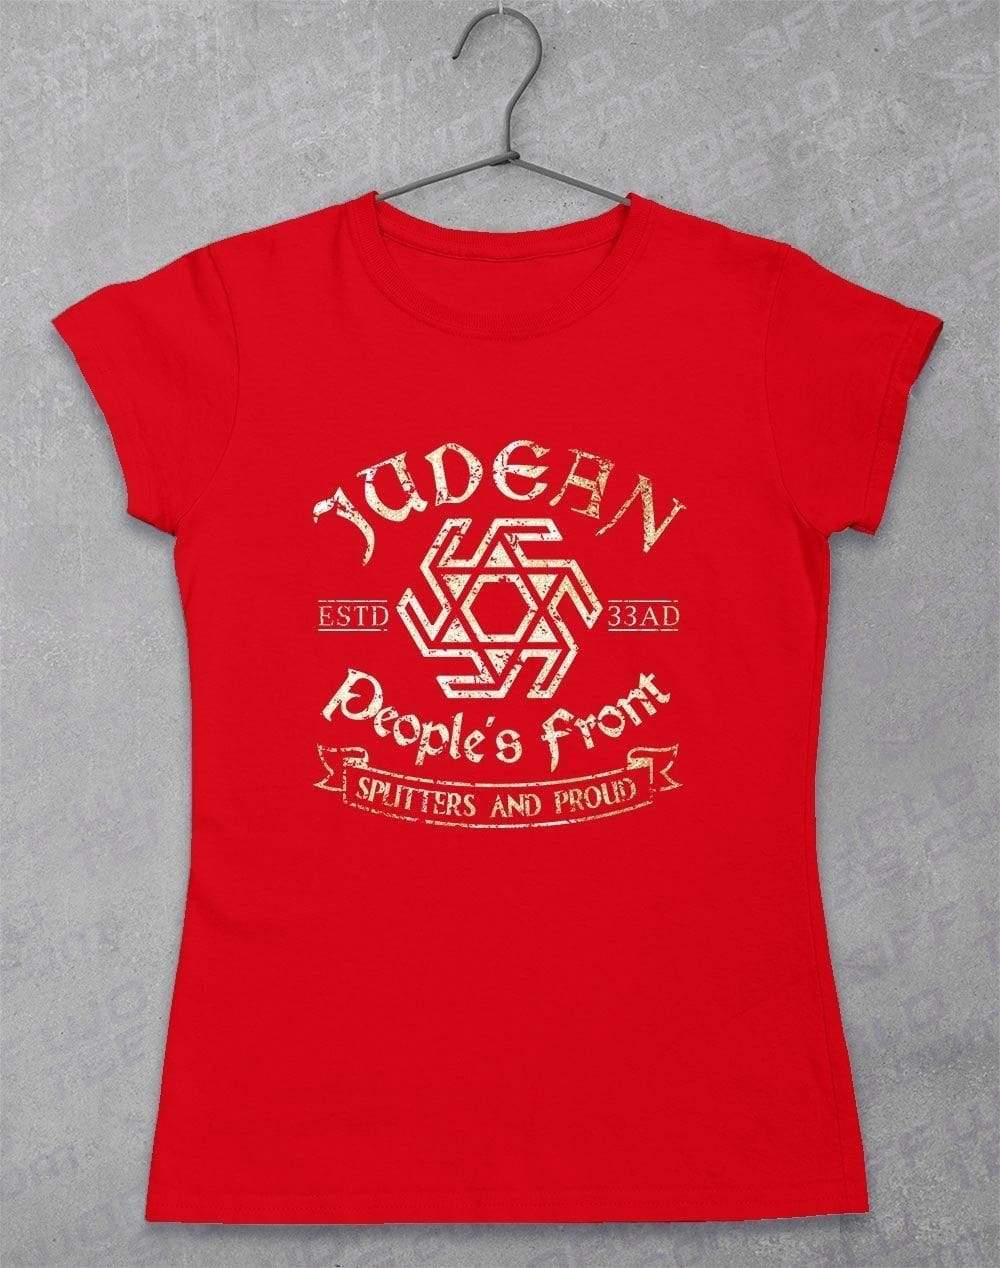 Judean People's Front Women's T-Shirt 8-10 / Red  - Off World Tees